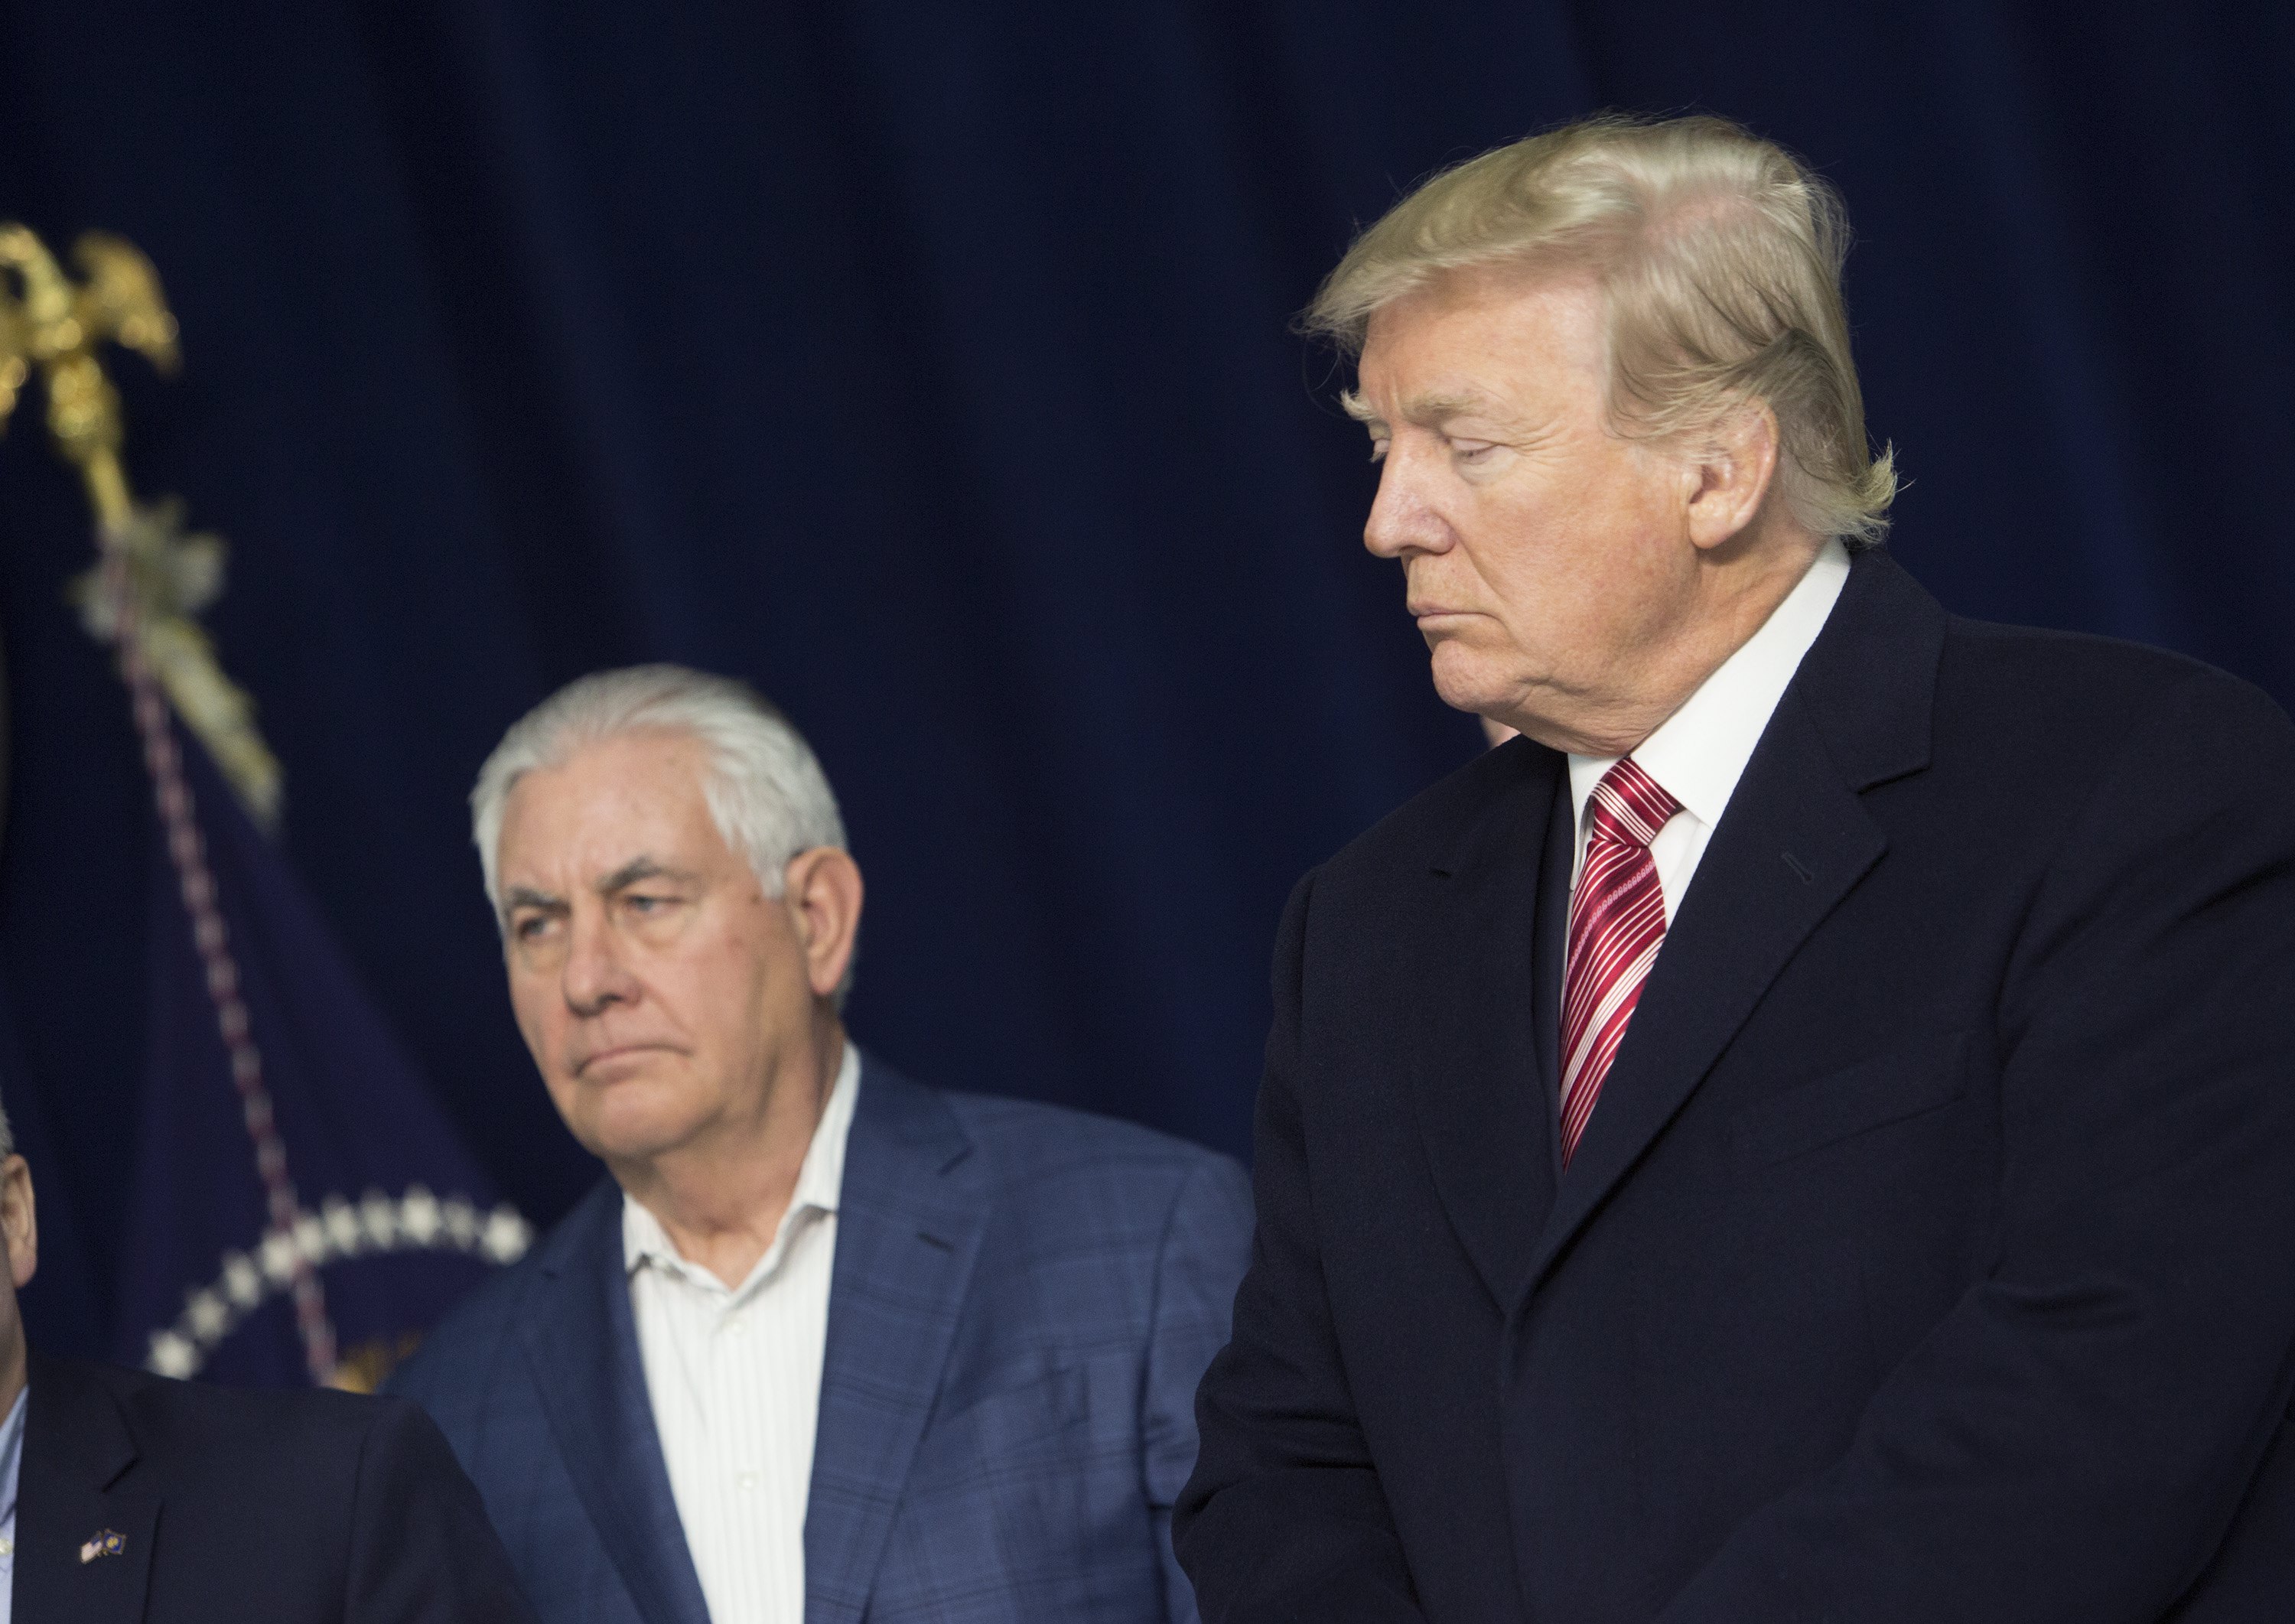 2018-01-06 13:00:02 epa06421370 US President Donald J. Trump (R) and US Secretary of State Rex Tillerson listen as Republican leadership takes turns speaking to the media at Camp David, Maryland, USA, 06 January 2018 after holding meetings with staff, members of his Cabinet and Republican members of Congress to discuss the Republican legislative agenda for 2018. EPA/Chris Kleponis / POOL